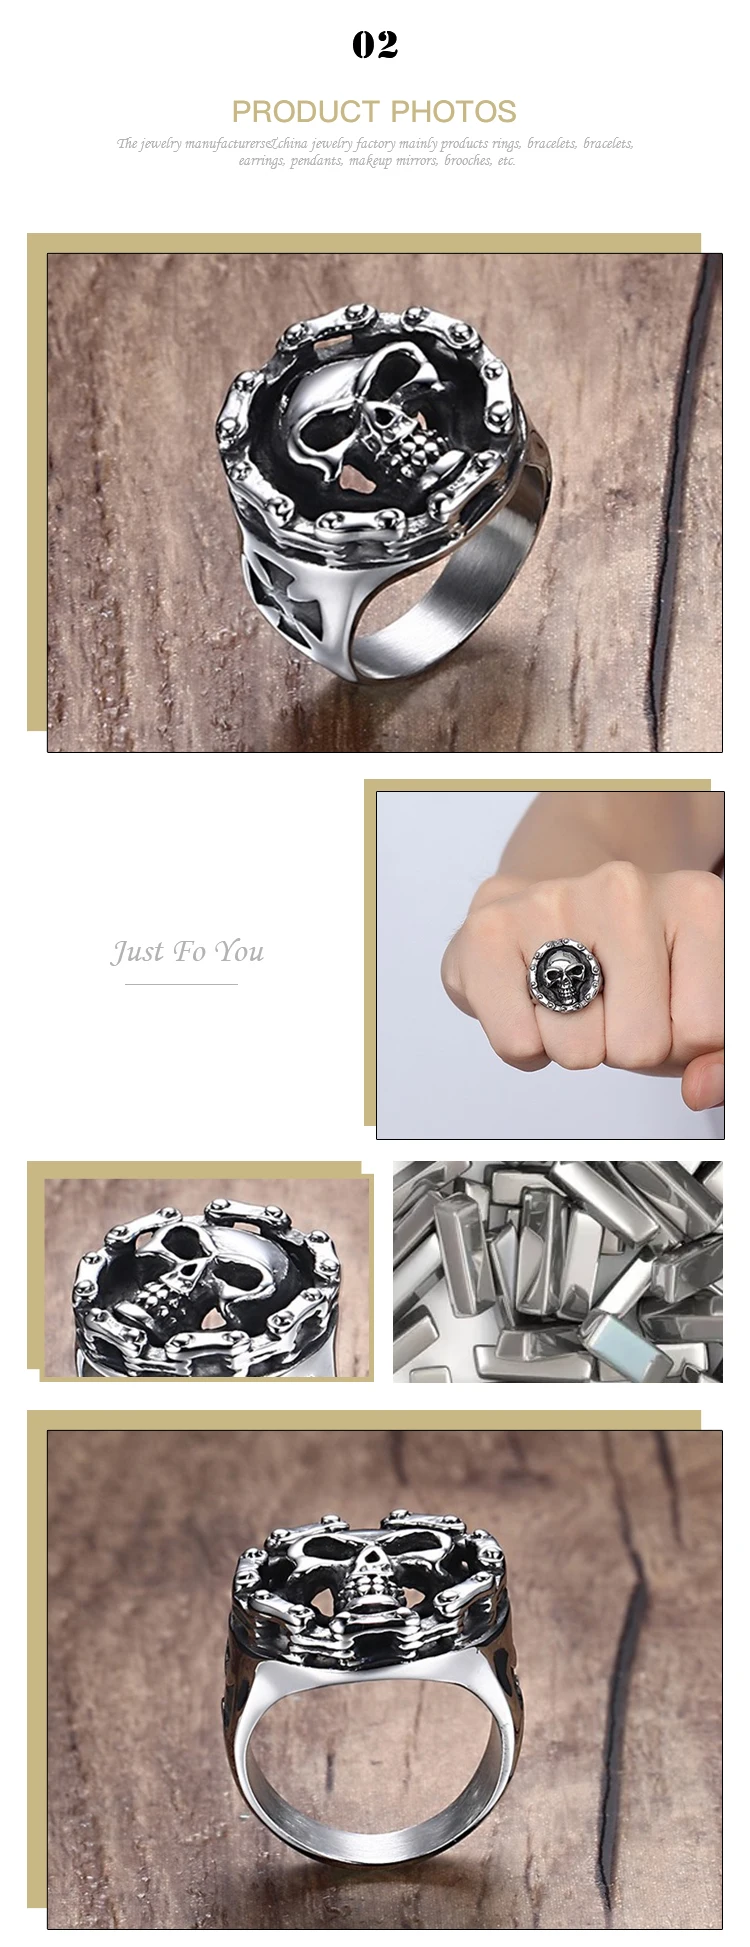 Wholesale Punk style personality classic titanium steel ghost ring fashion skull men's ring RC-296